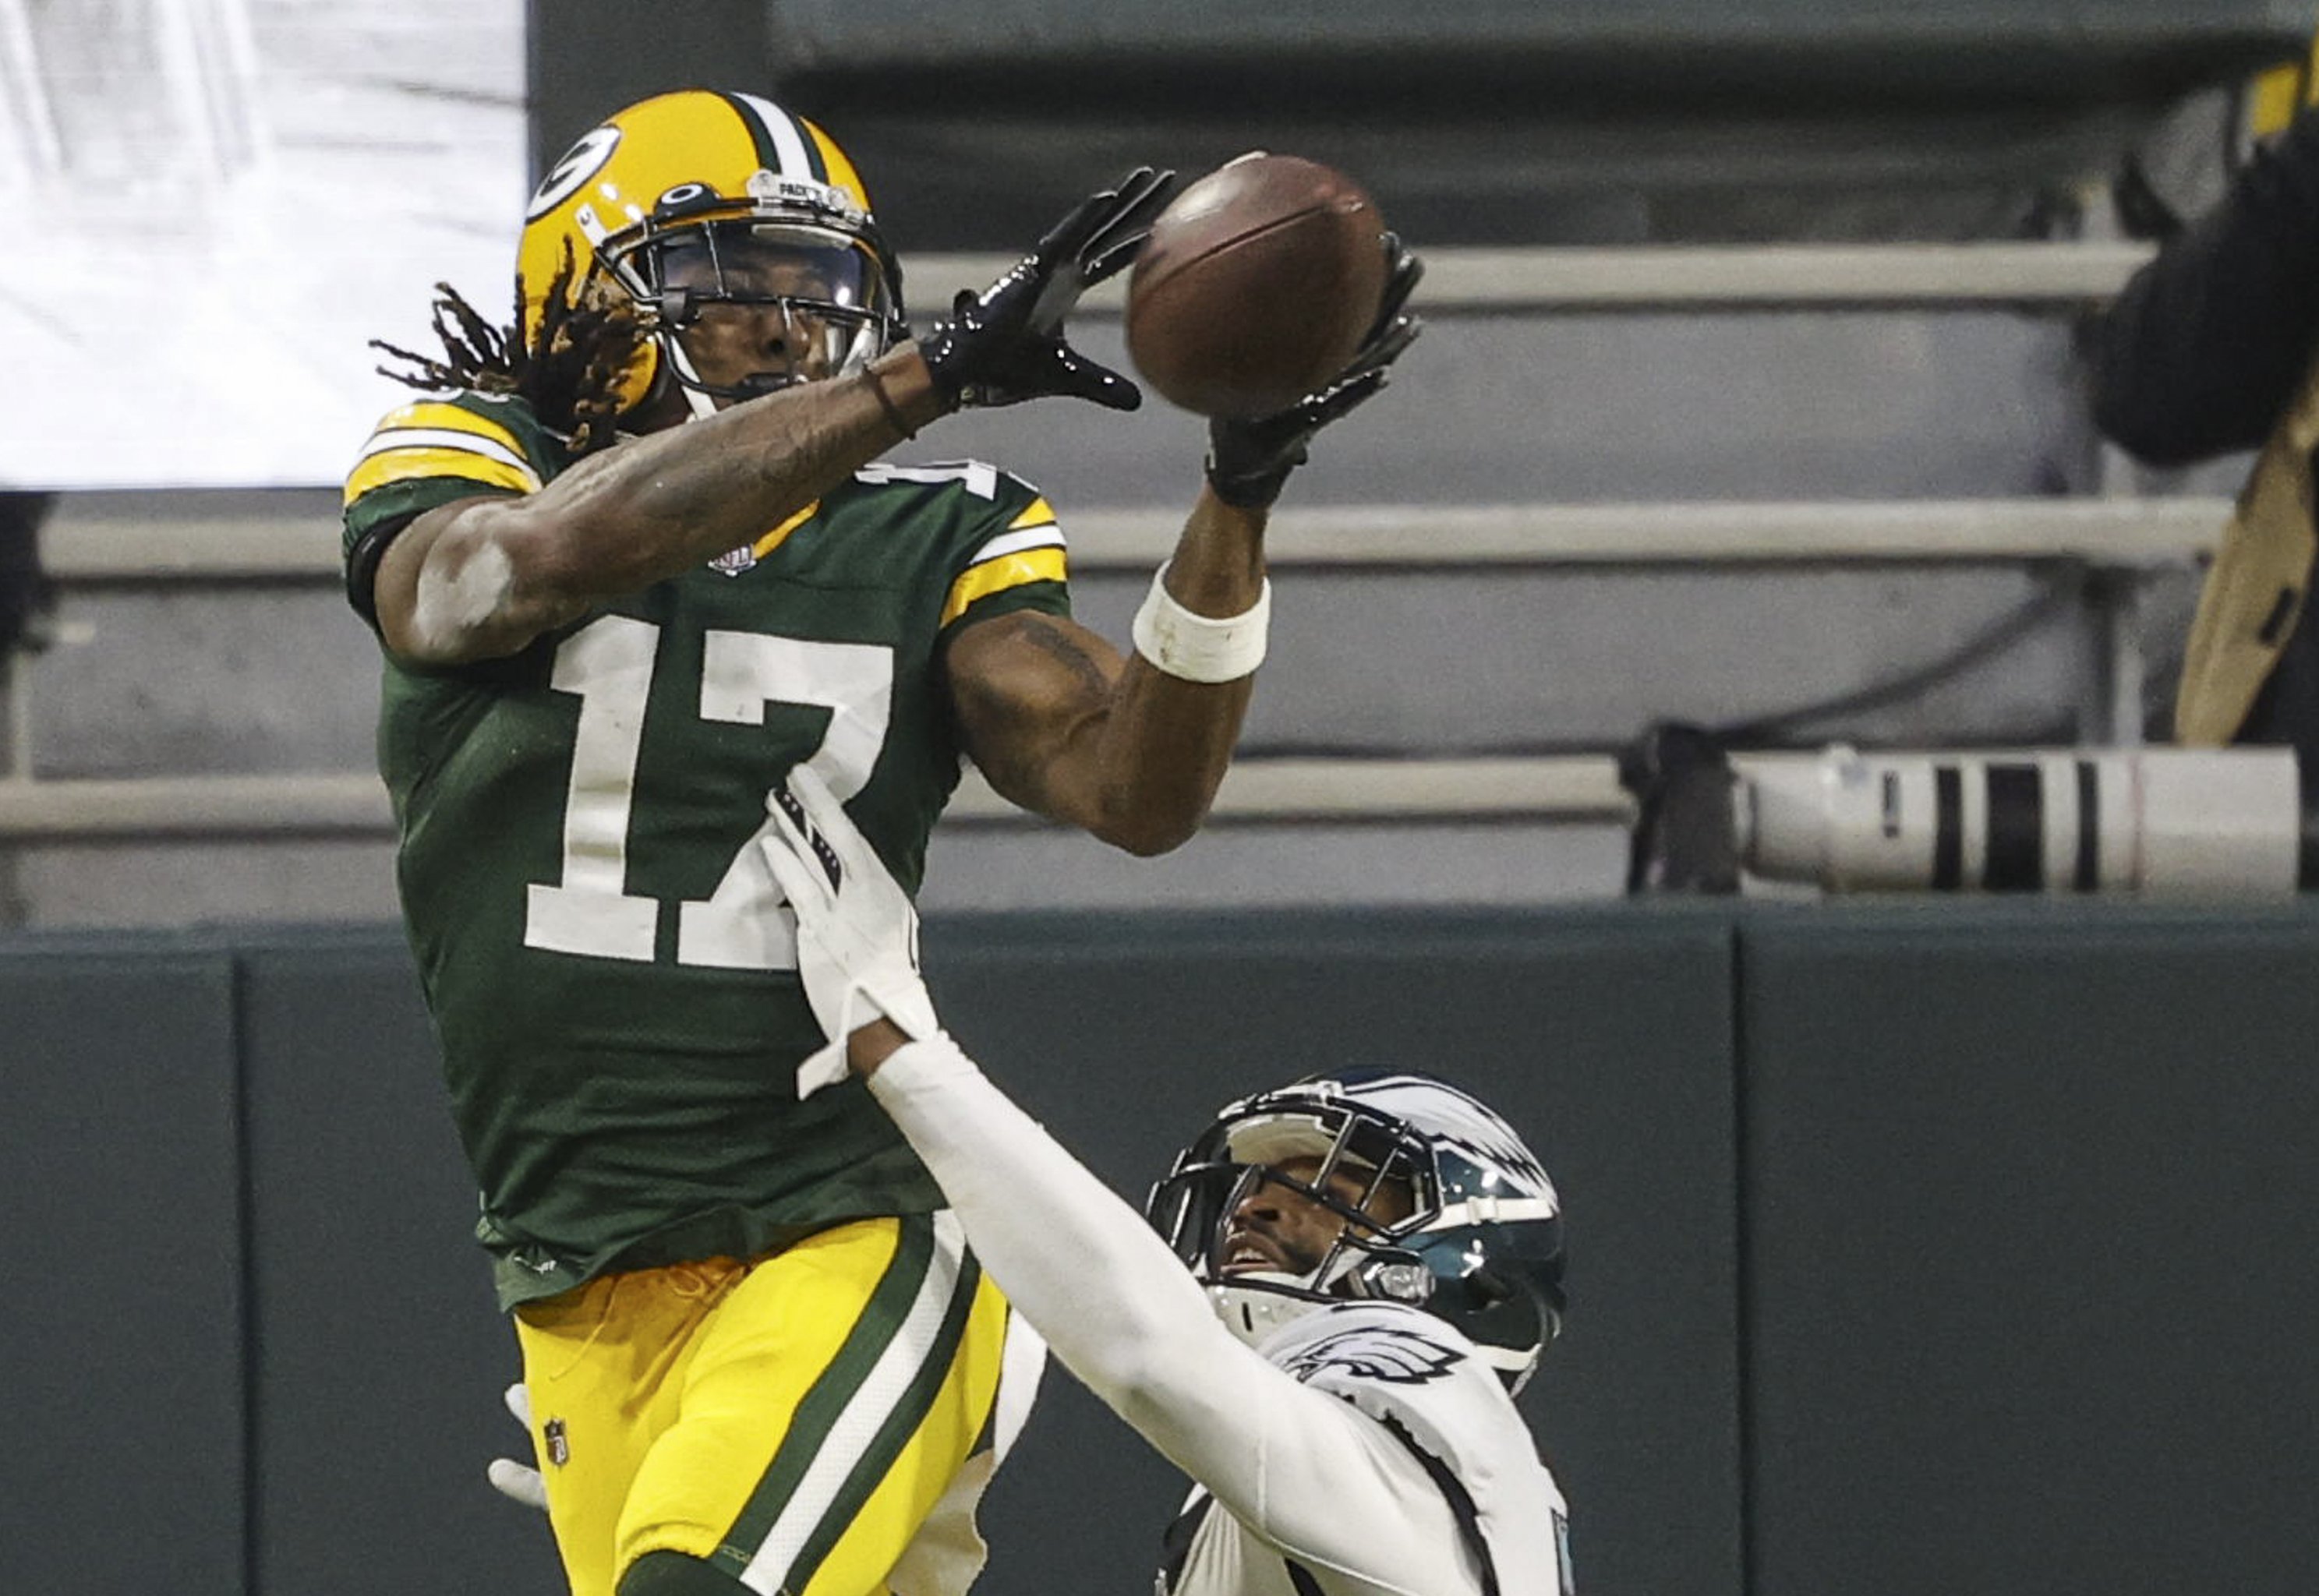 Ranking the NFL's best wide receivers for the 2021 season from 1-30